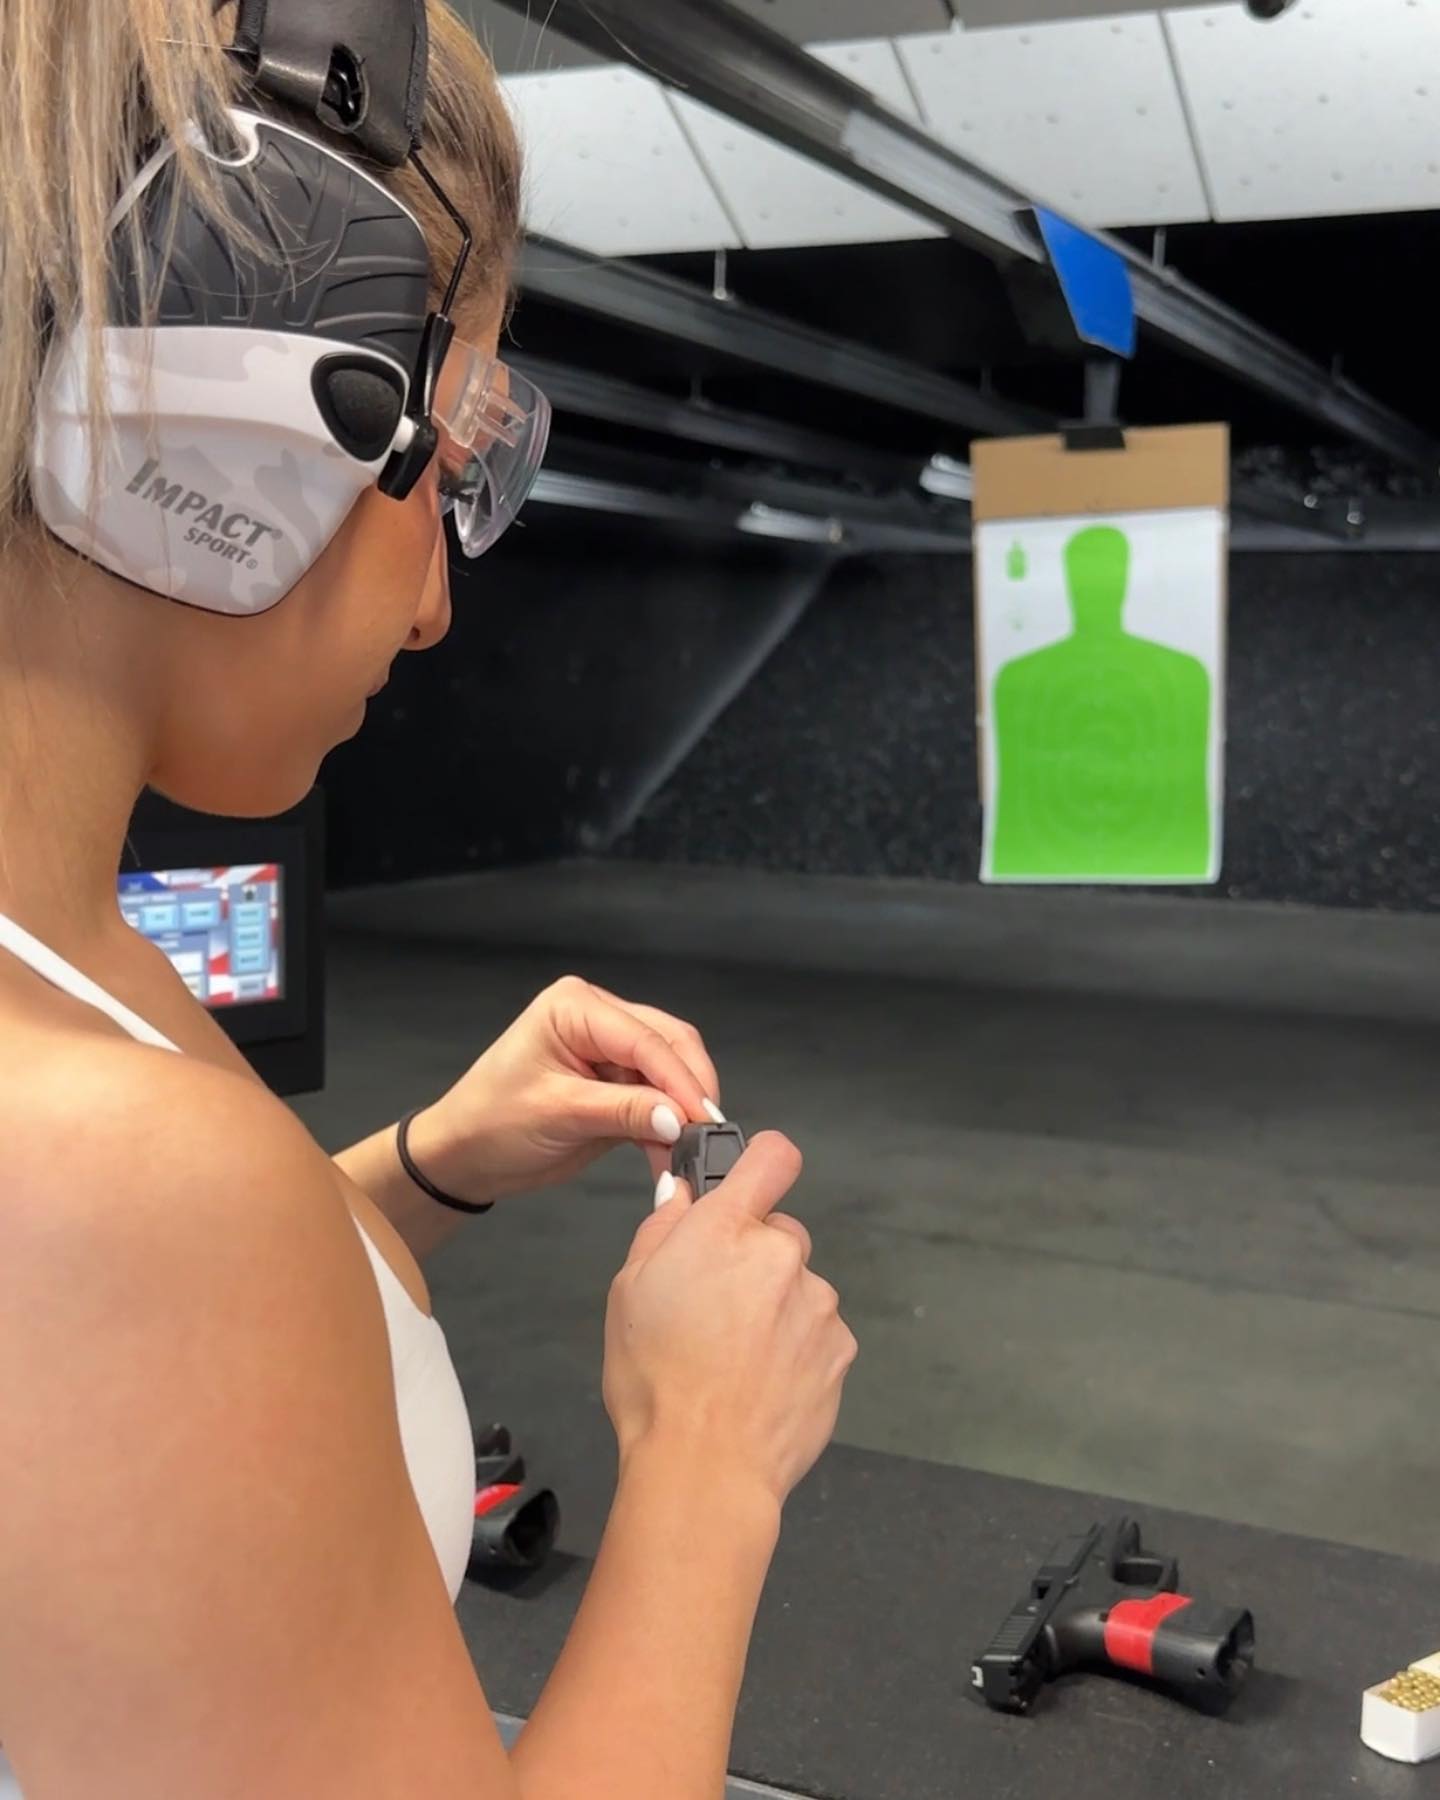 This was an experience I honestly needed. I learned a lot and it was fun. 
At first I was so scared and my body was not used to it but after a little bit I was okay. 
If you want to try something go for it , don’t wait for others when you can just take yourself and have fun. 
#gunrange #funexperience